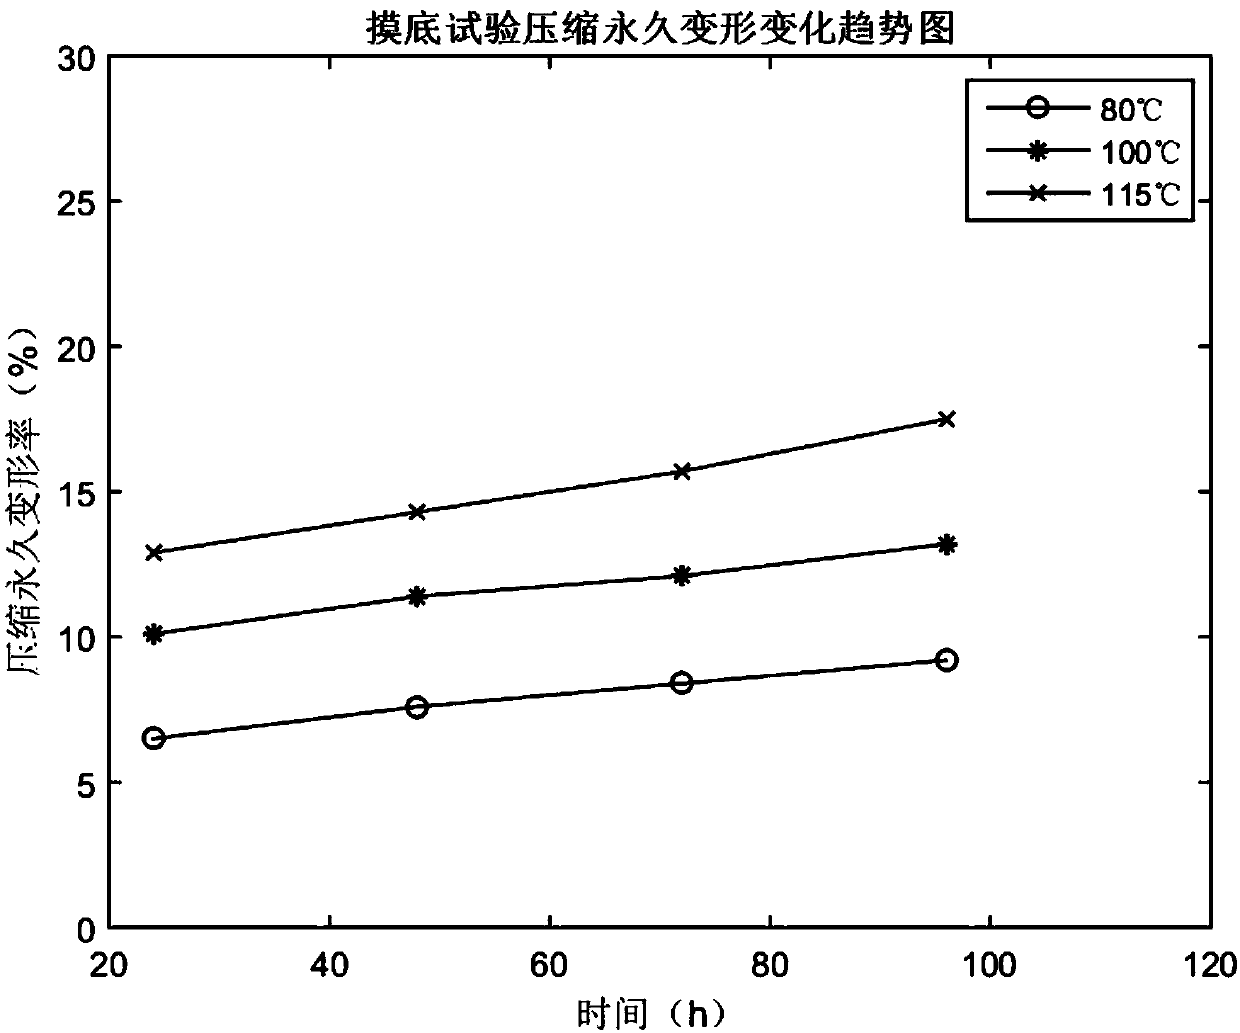 Weibull-distribution-based method for predicting reliable service life of rubber ring